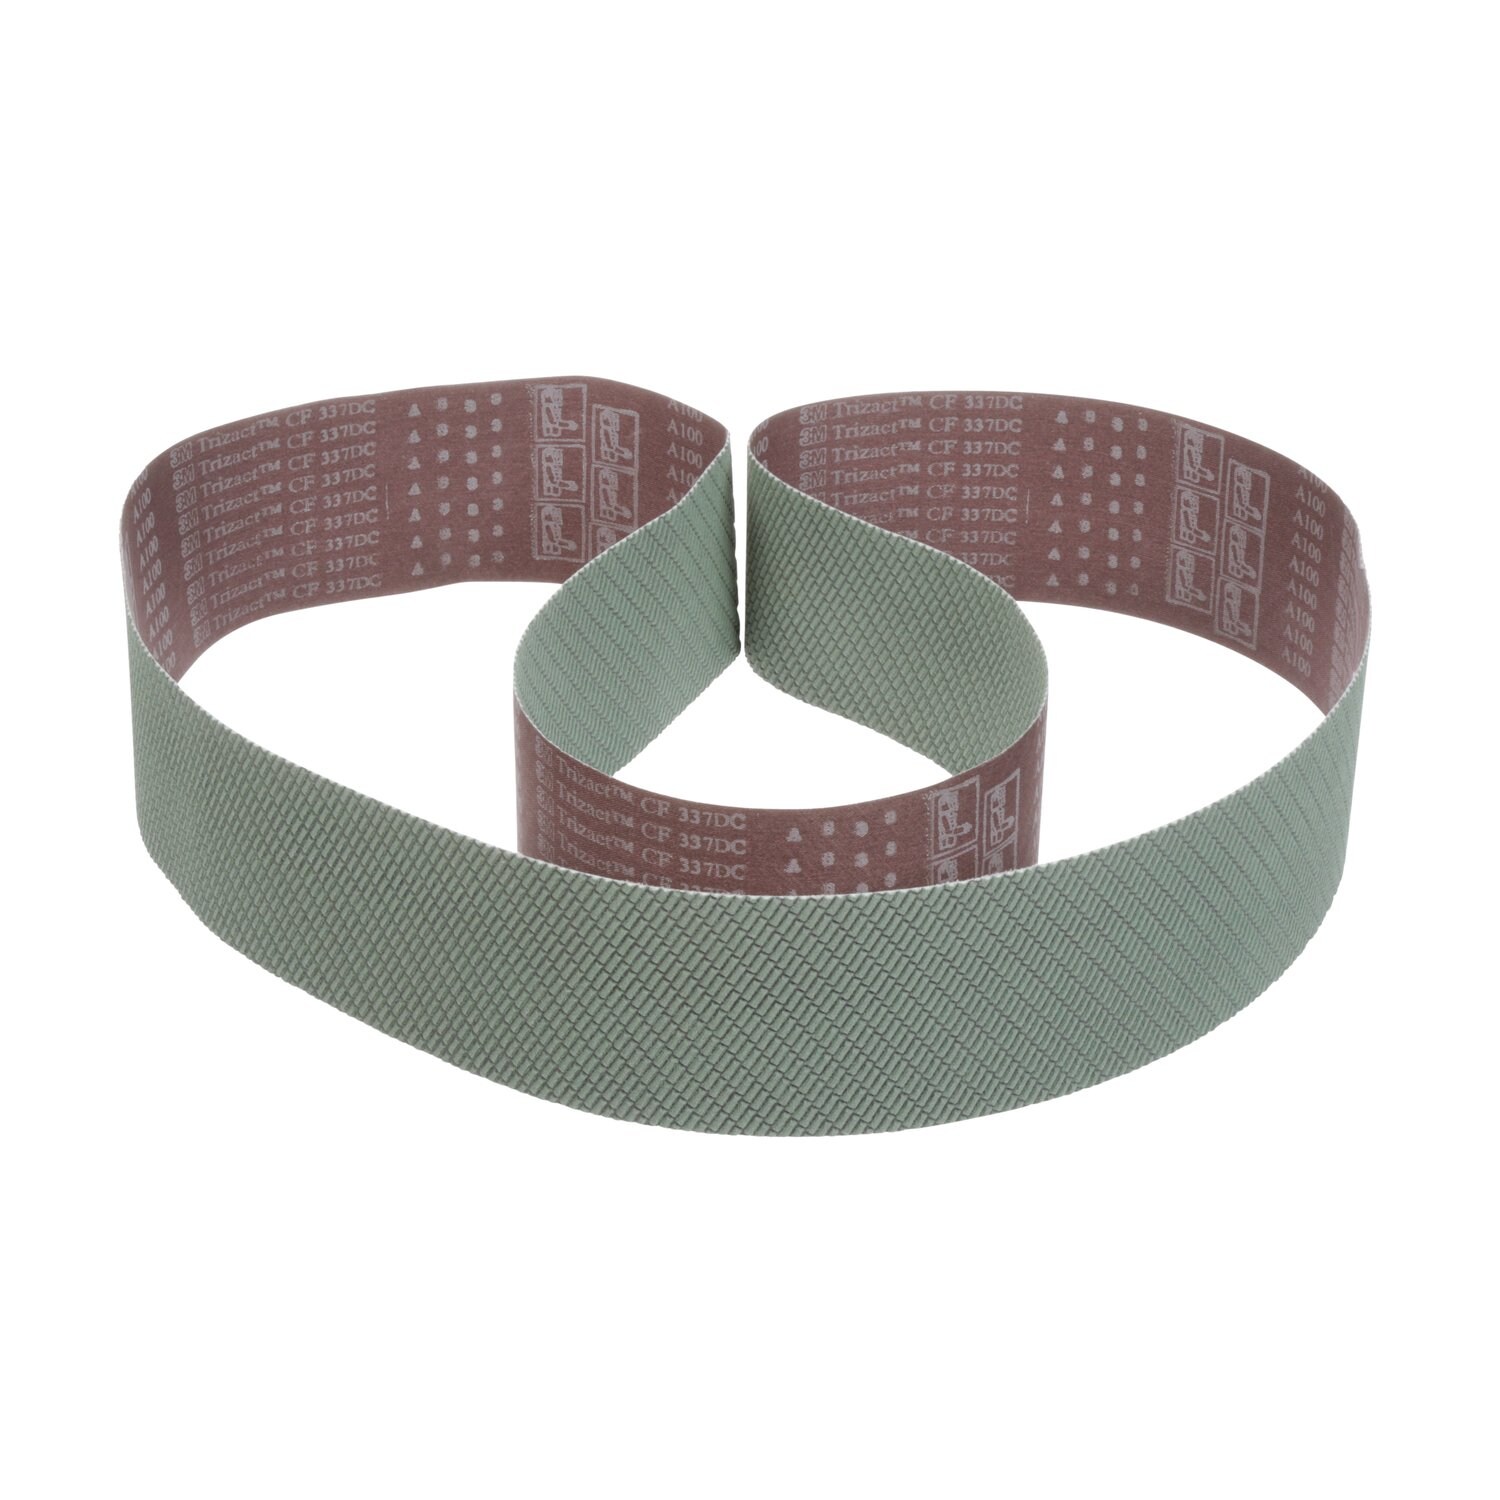 7100052828 - 3M Trizact Cloth Belt 337DC, A160 X-weight, Config